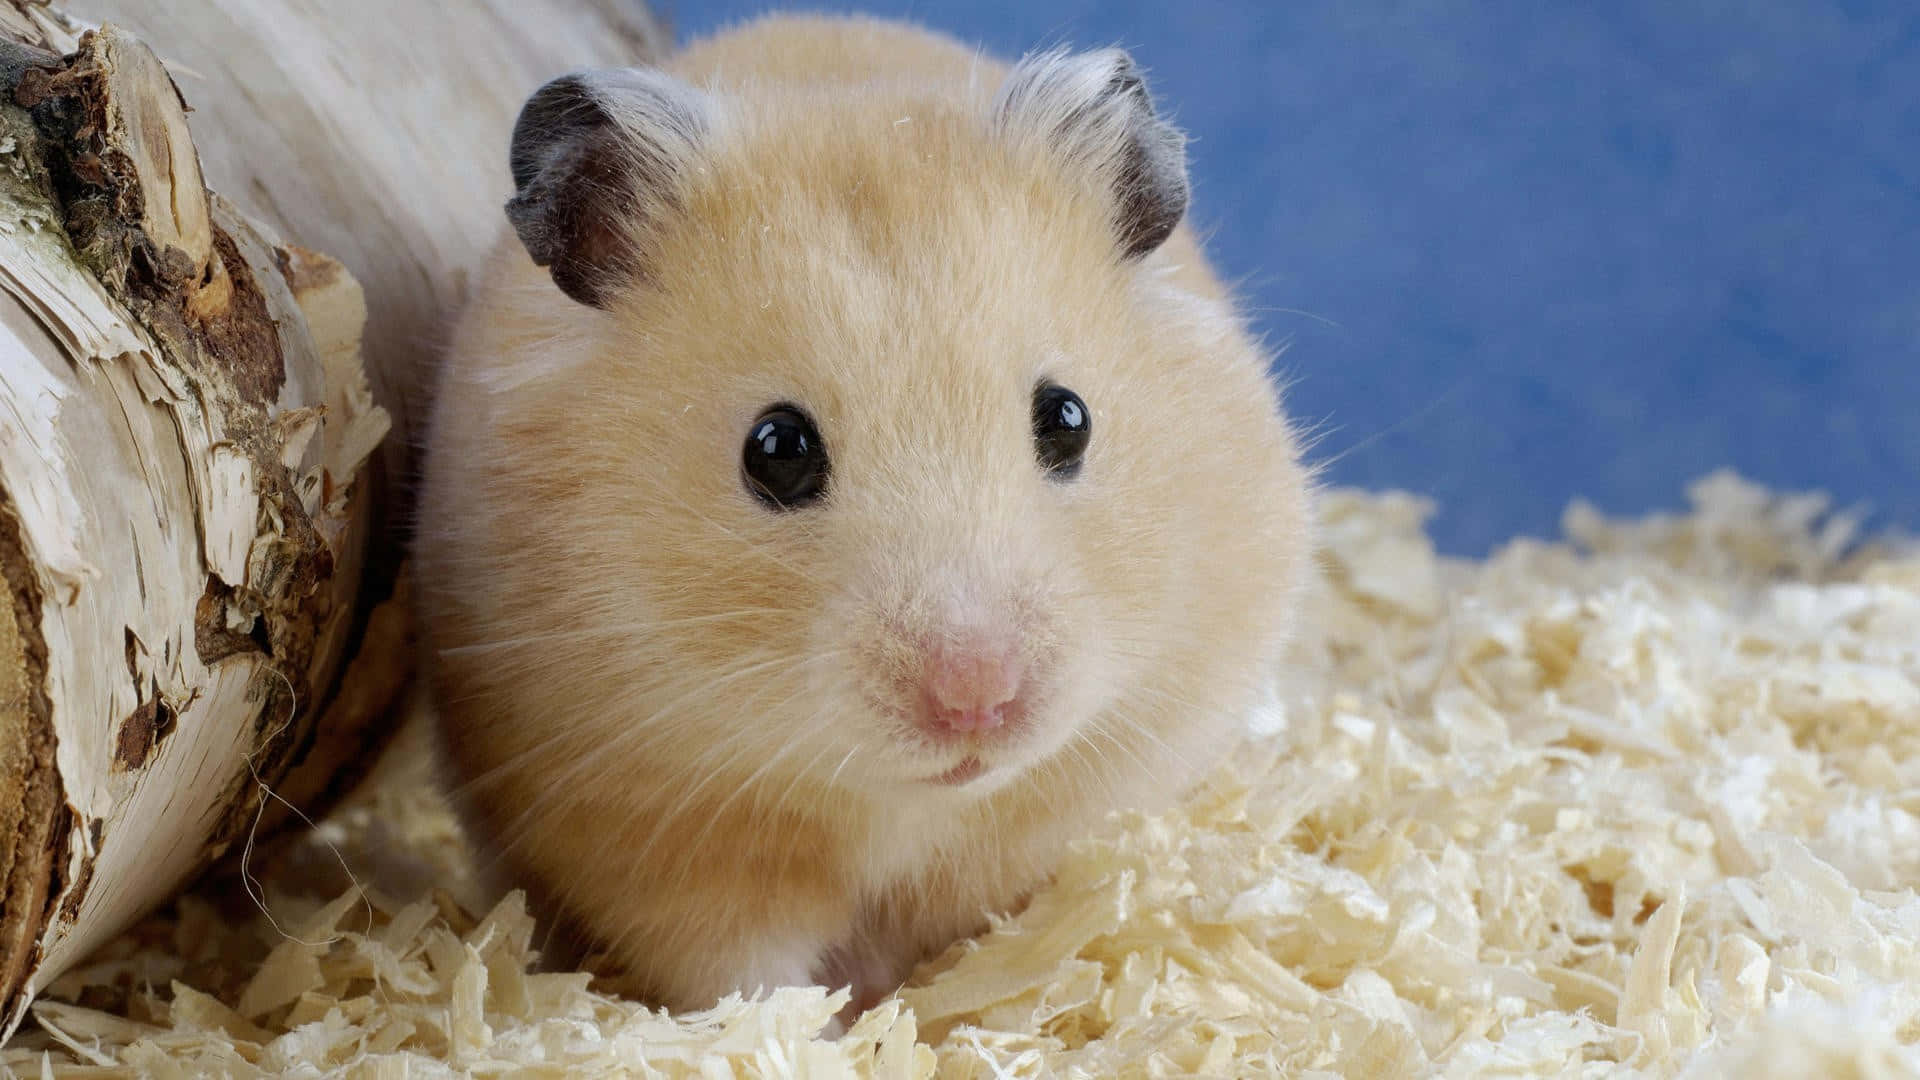 A little hamster pauses to look around Wallpaper